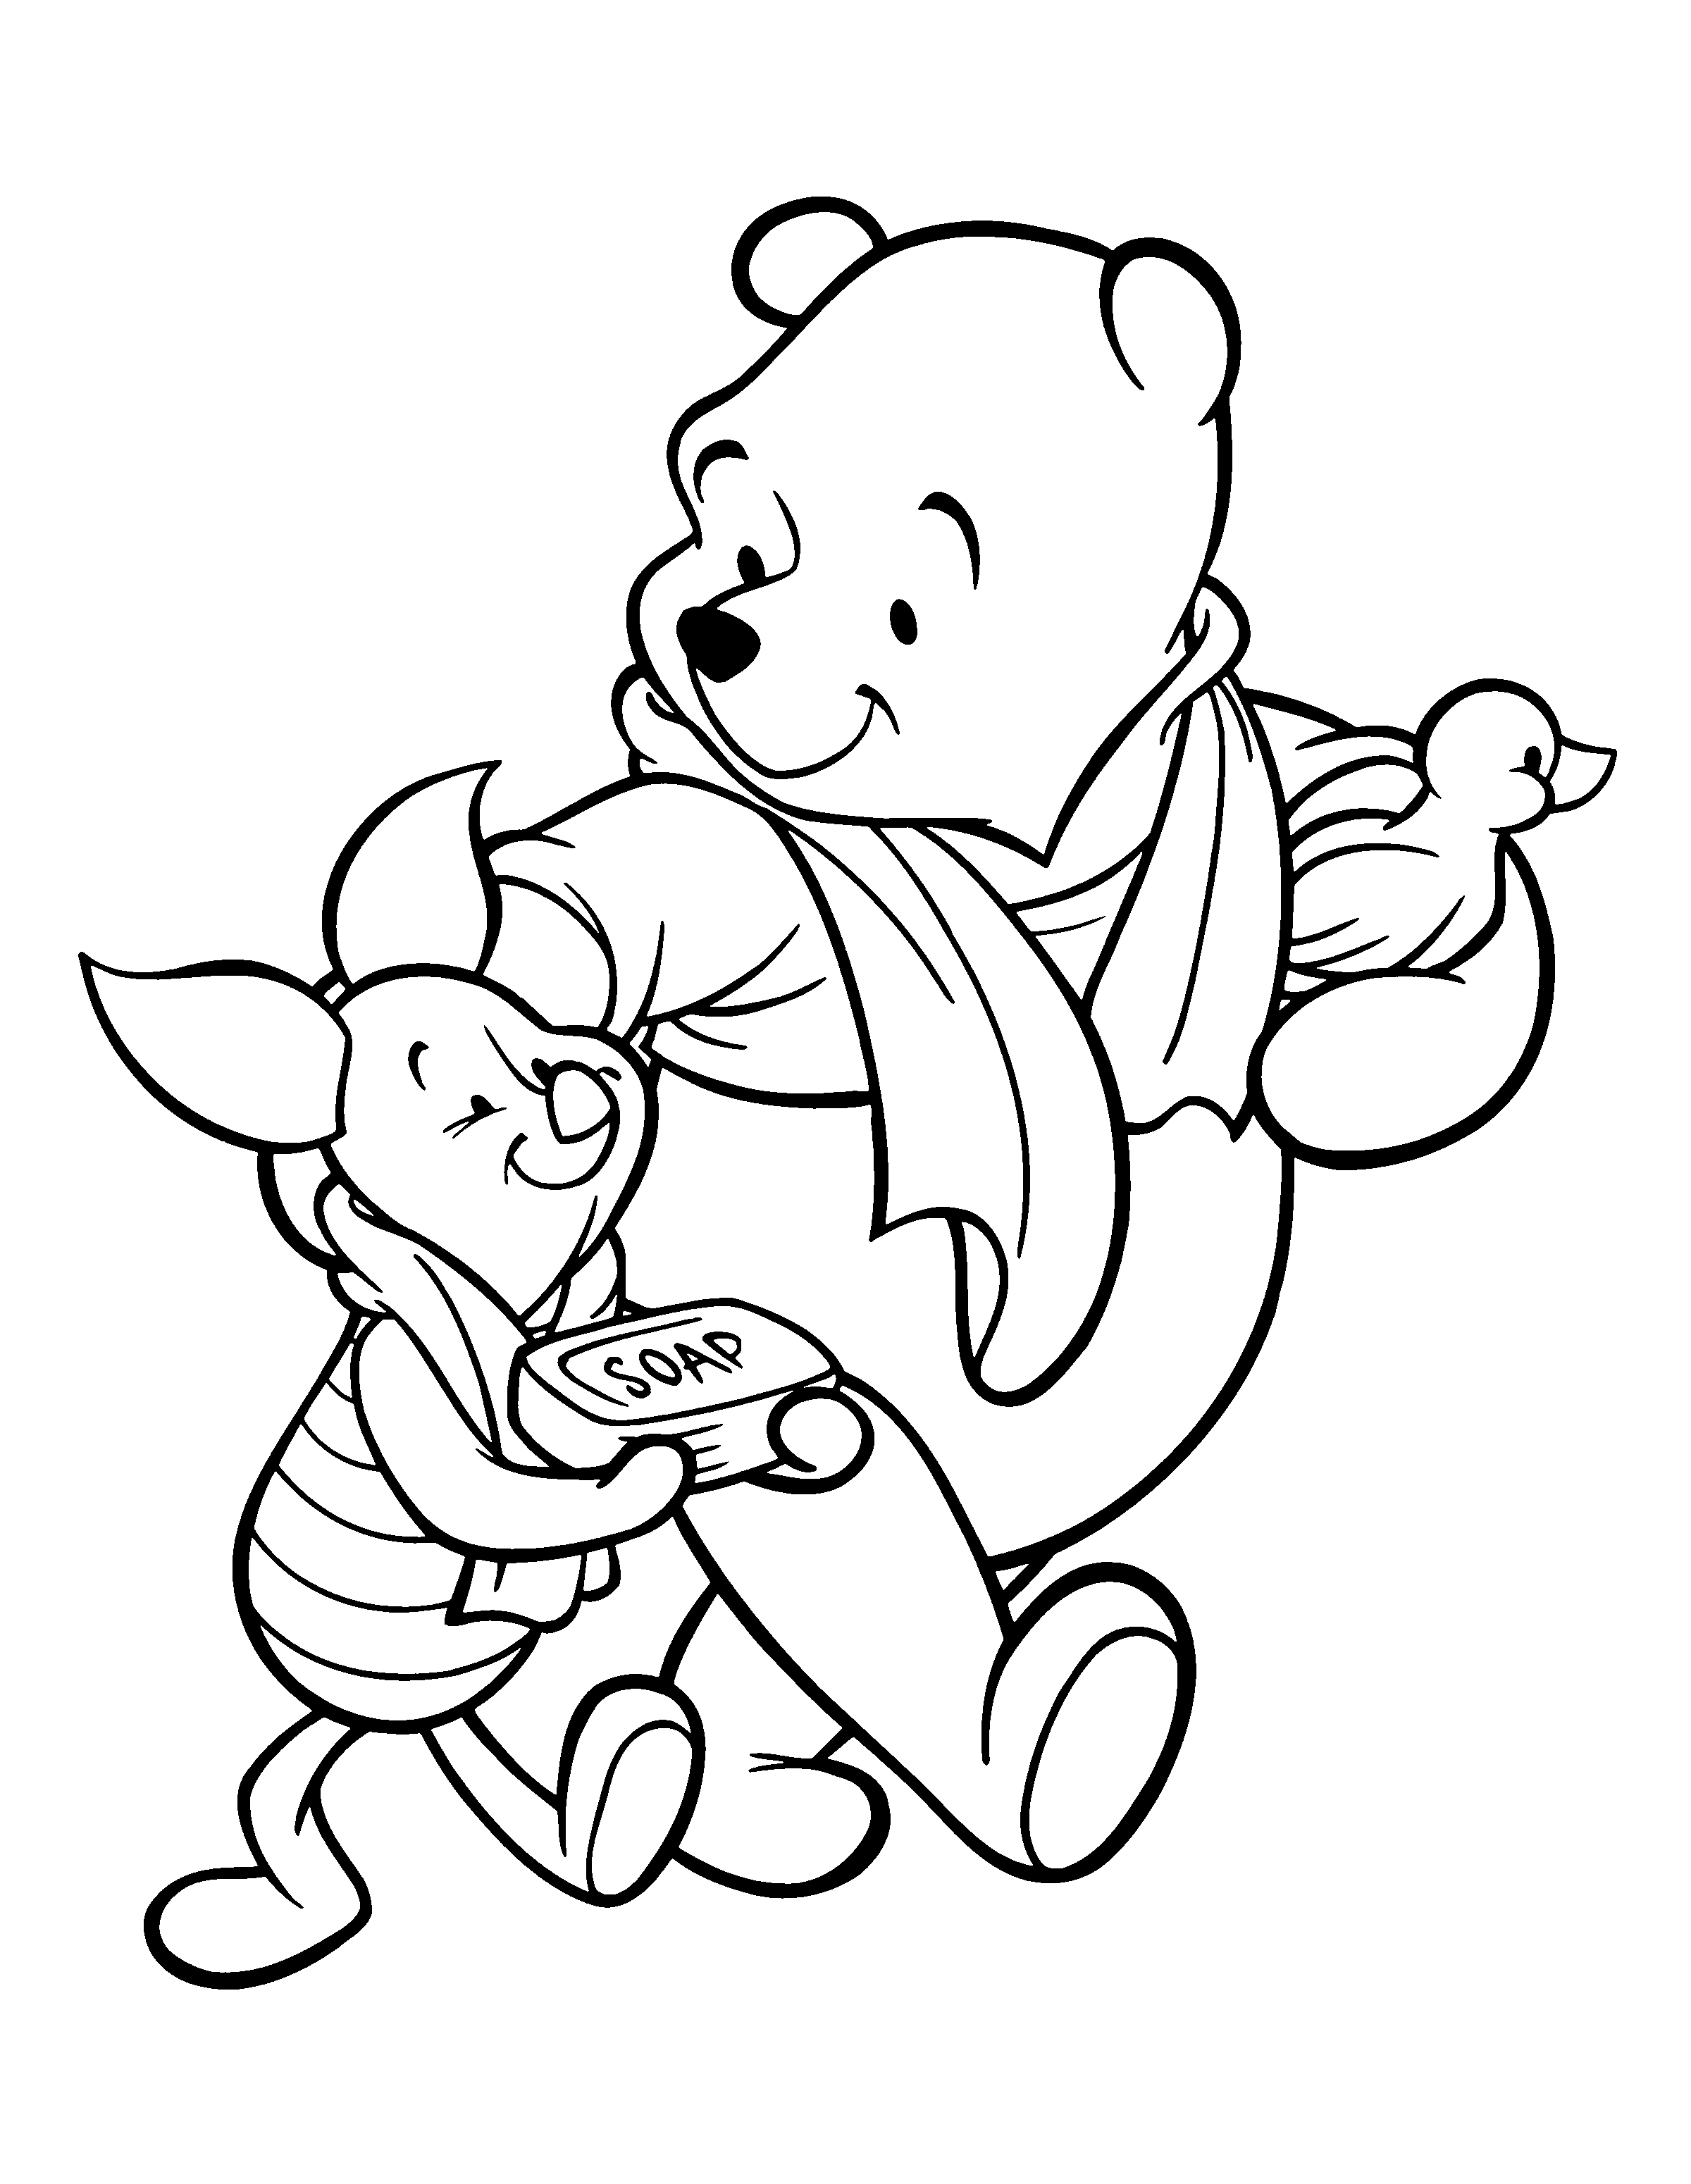 Coloring Page - Winnie the pooh coloring pages 105